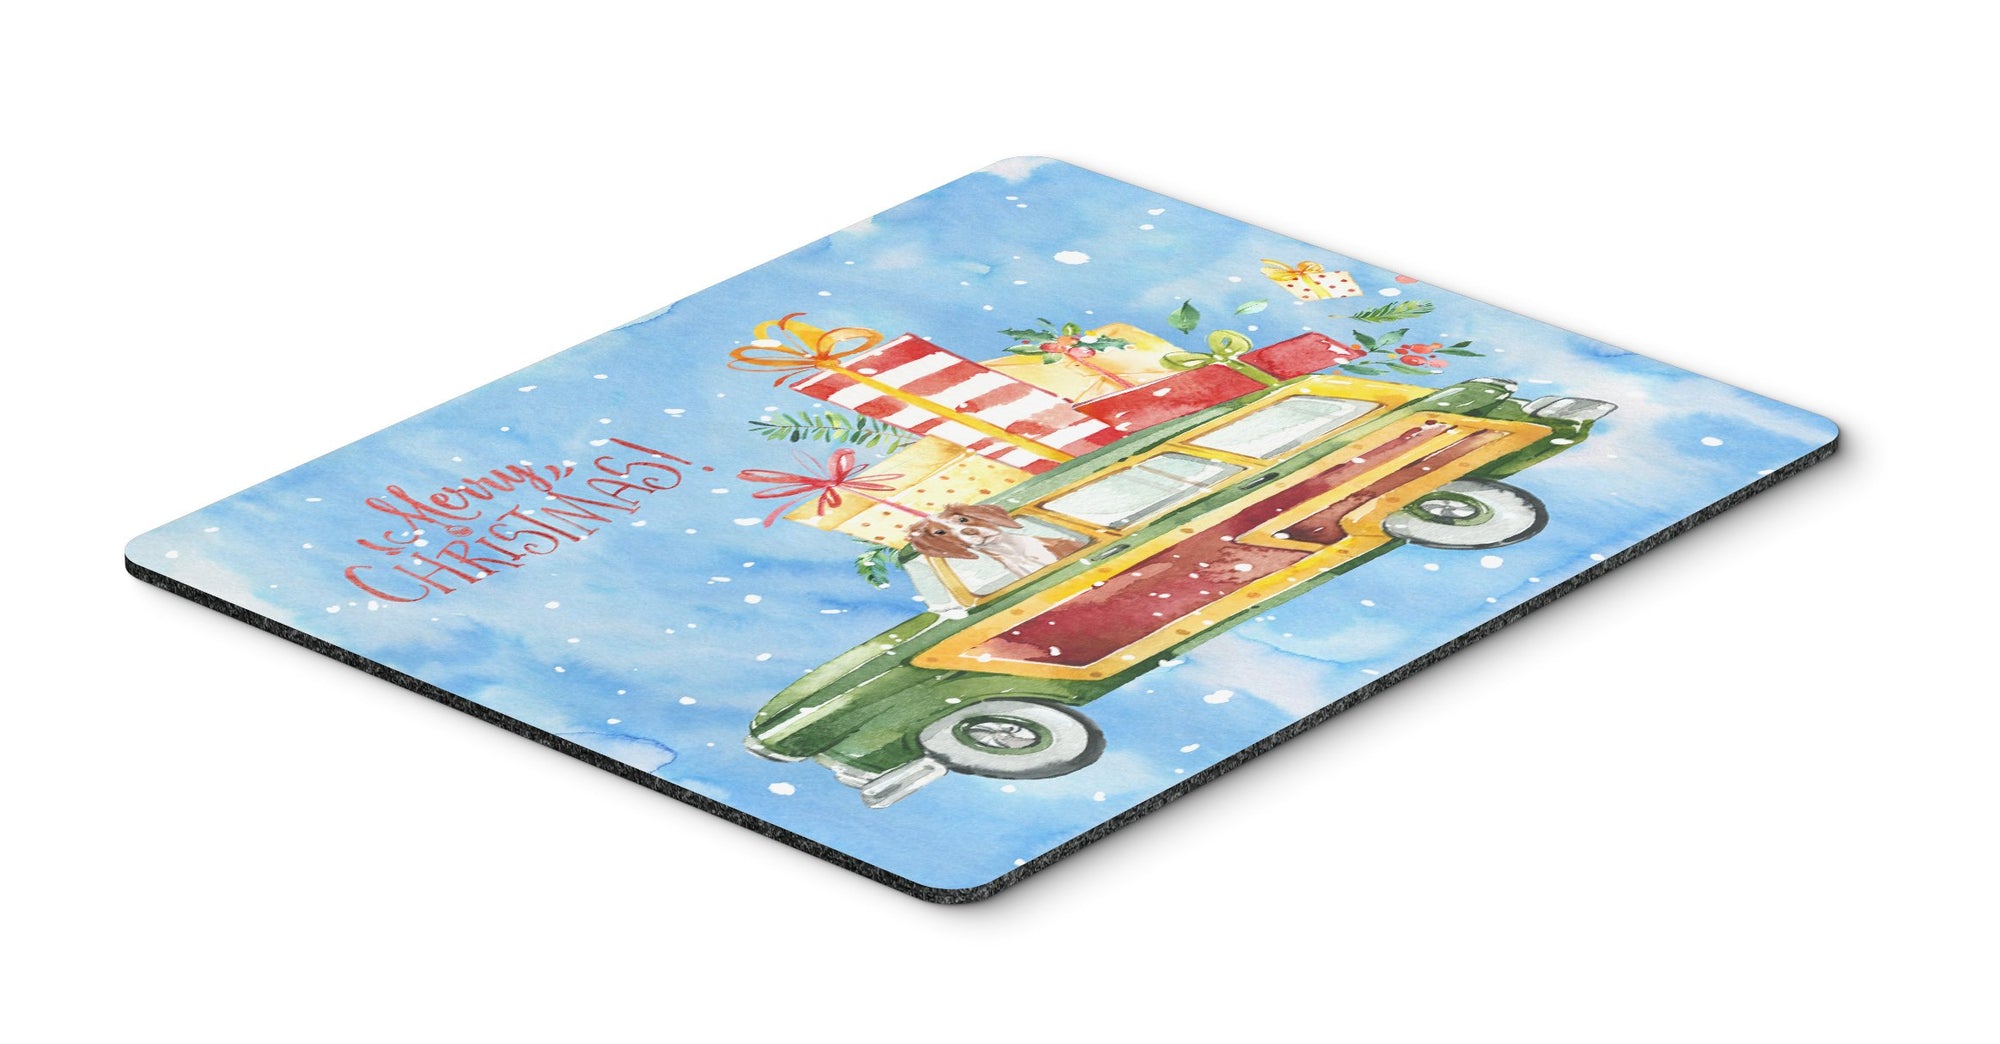 Merry Christmas Brittany Spaniel Mouse Pad, Hot Pad or Trivet CK2436MP by Caroline's Treasures